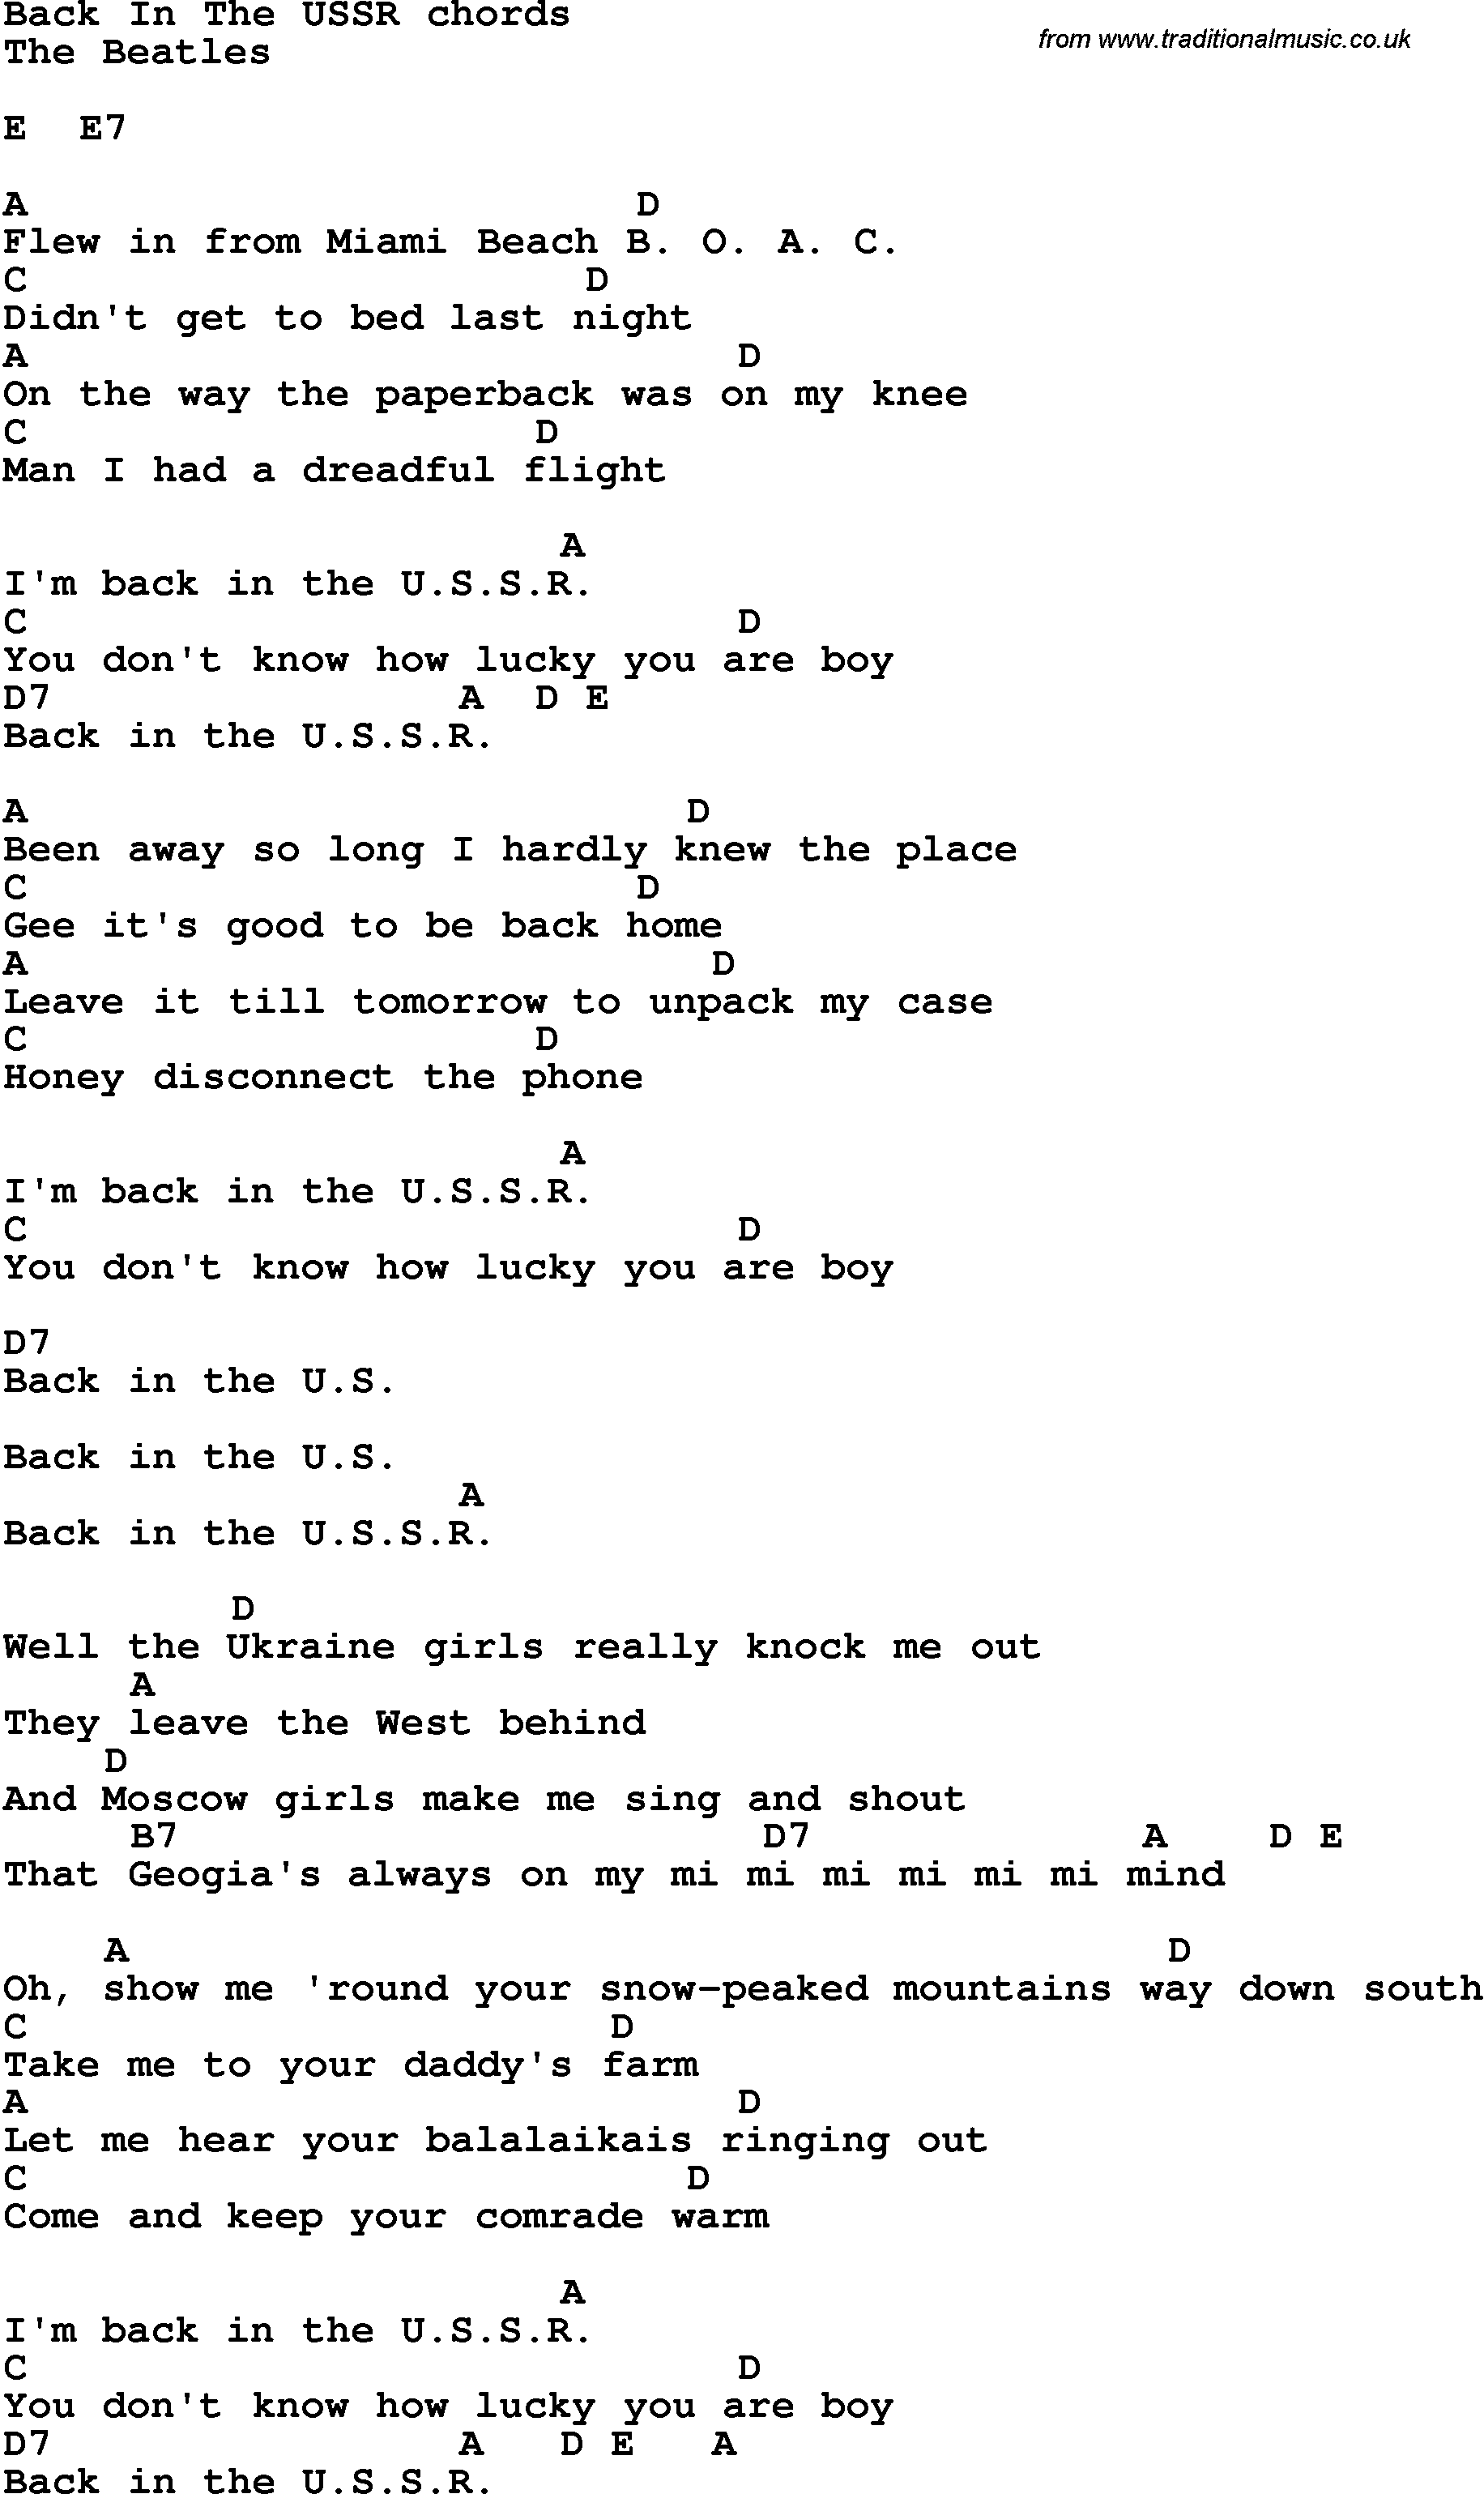 Song Lyrics with guitar chords for Back In The Ussr - The Beatles